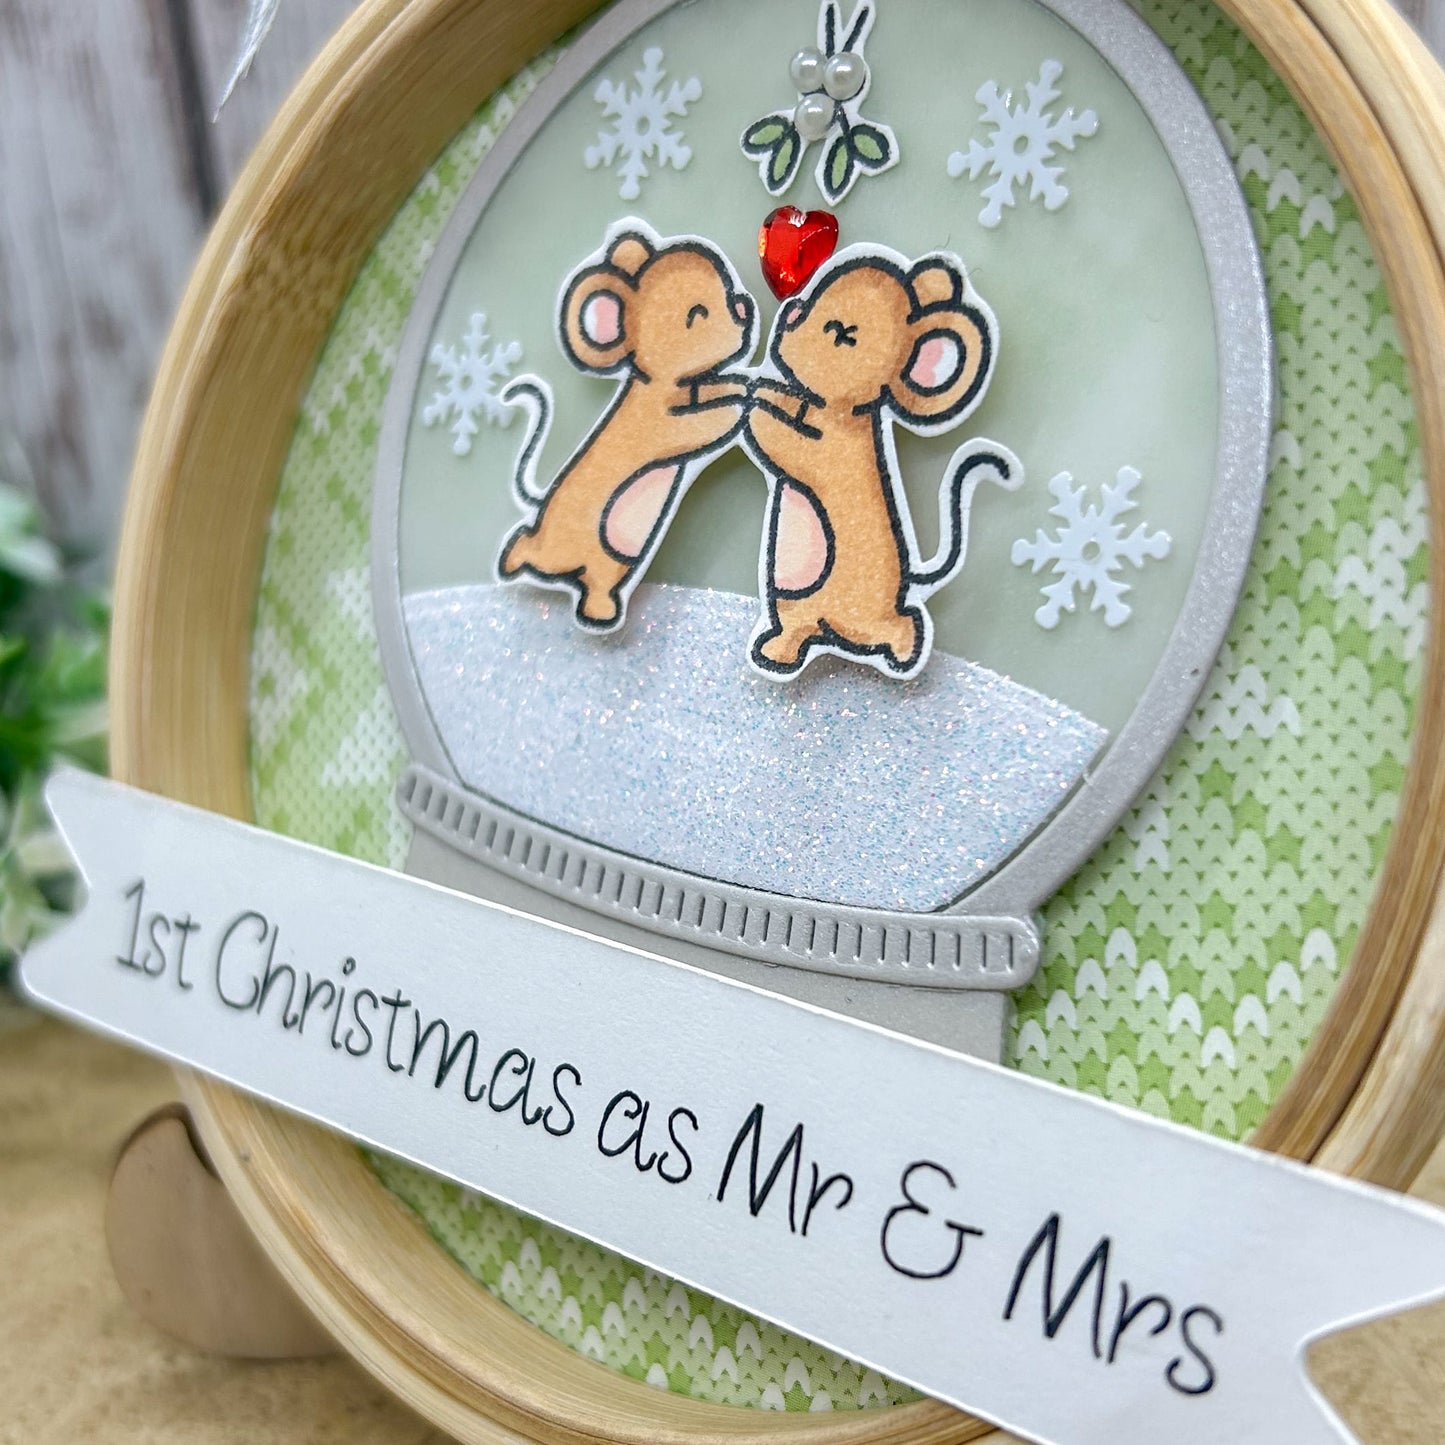 1st Christmas As Mr & Mrs Embroidery Hoop Tree Decoration